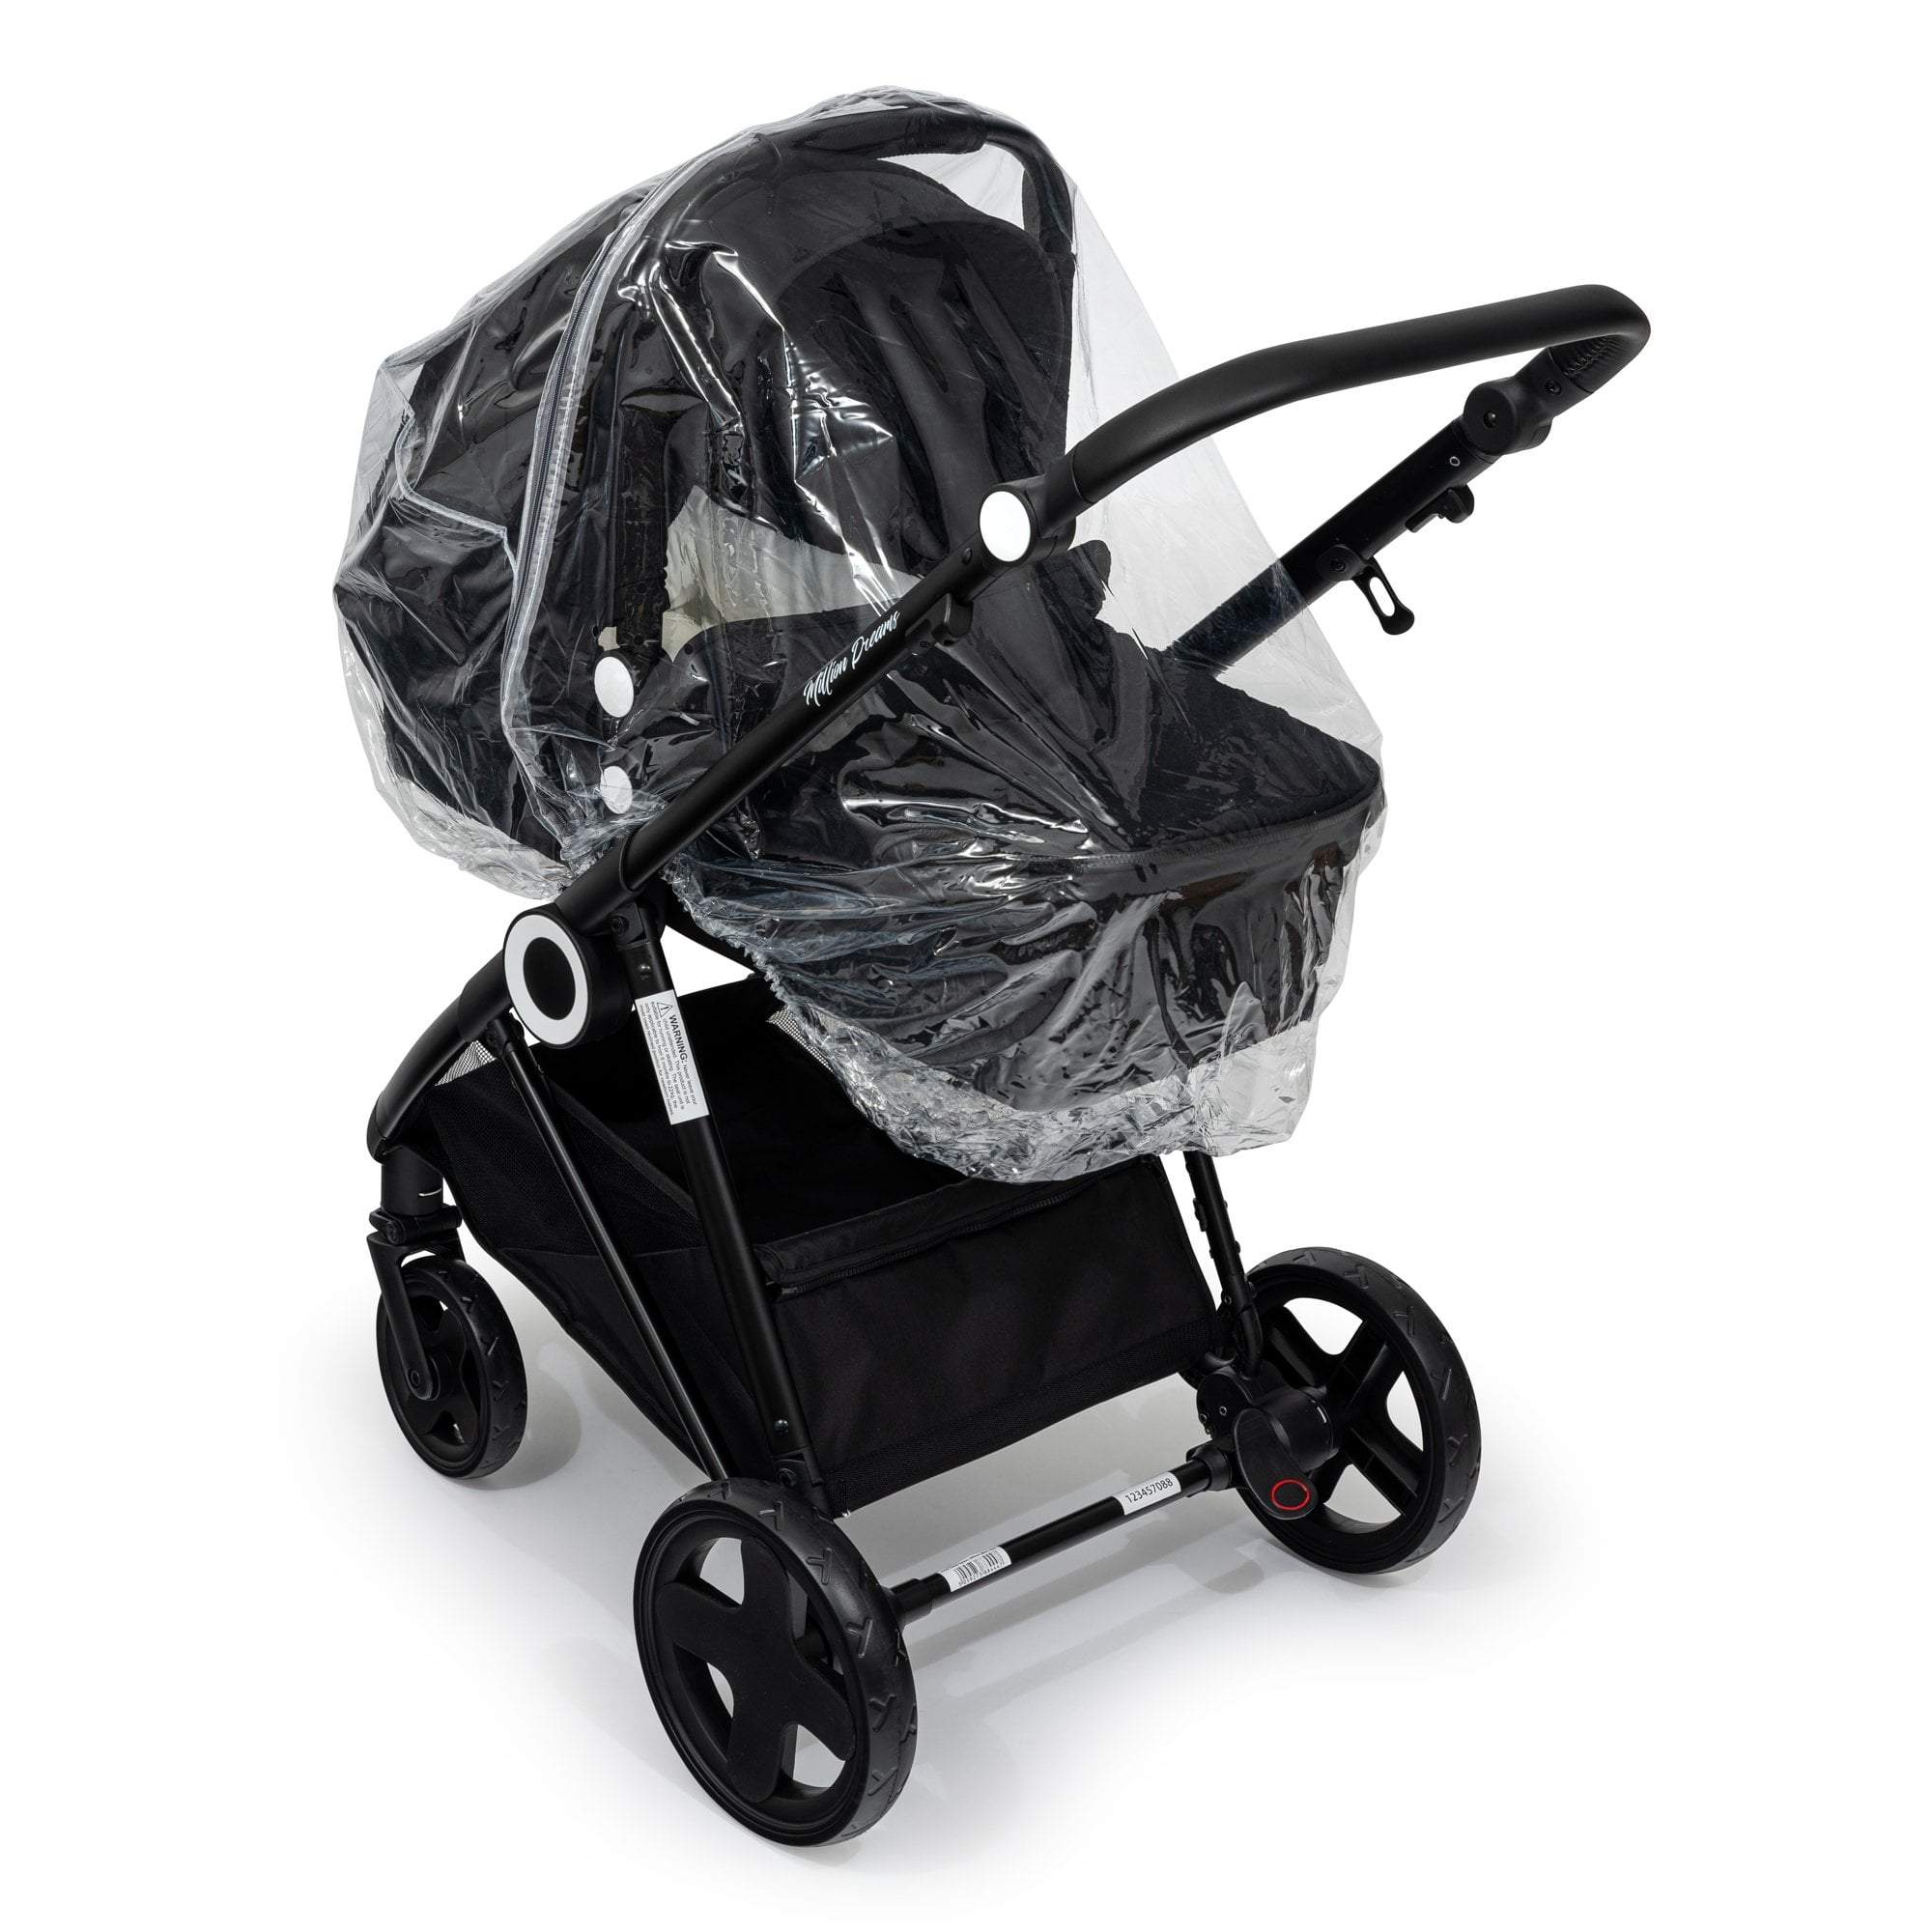 Carrycot Raincover Compatible With Chicco - Fits All Models - For Your Little One